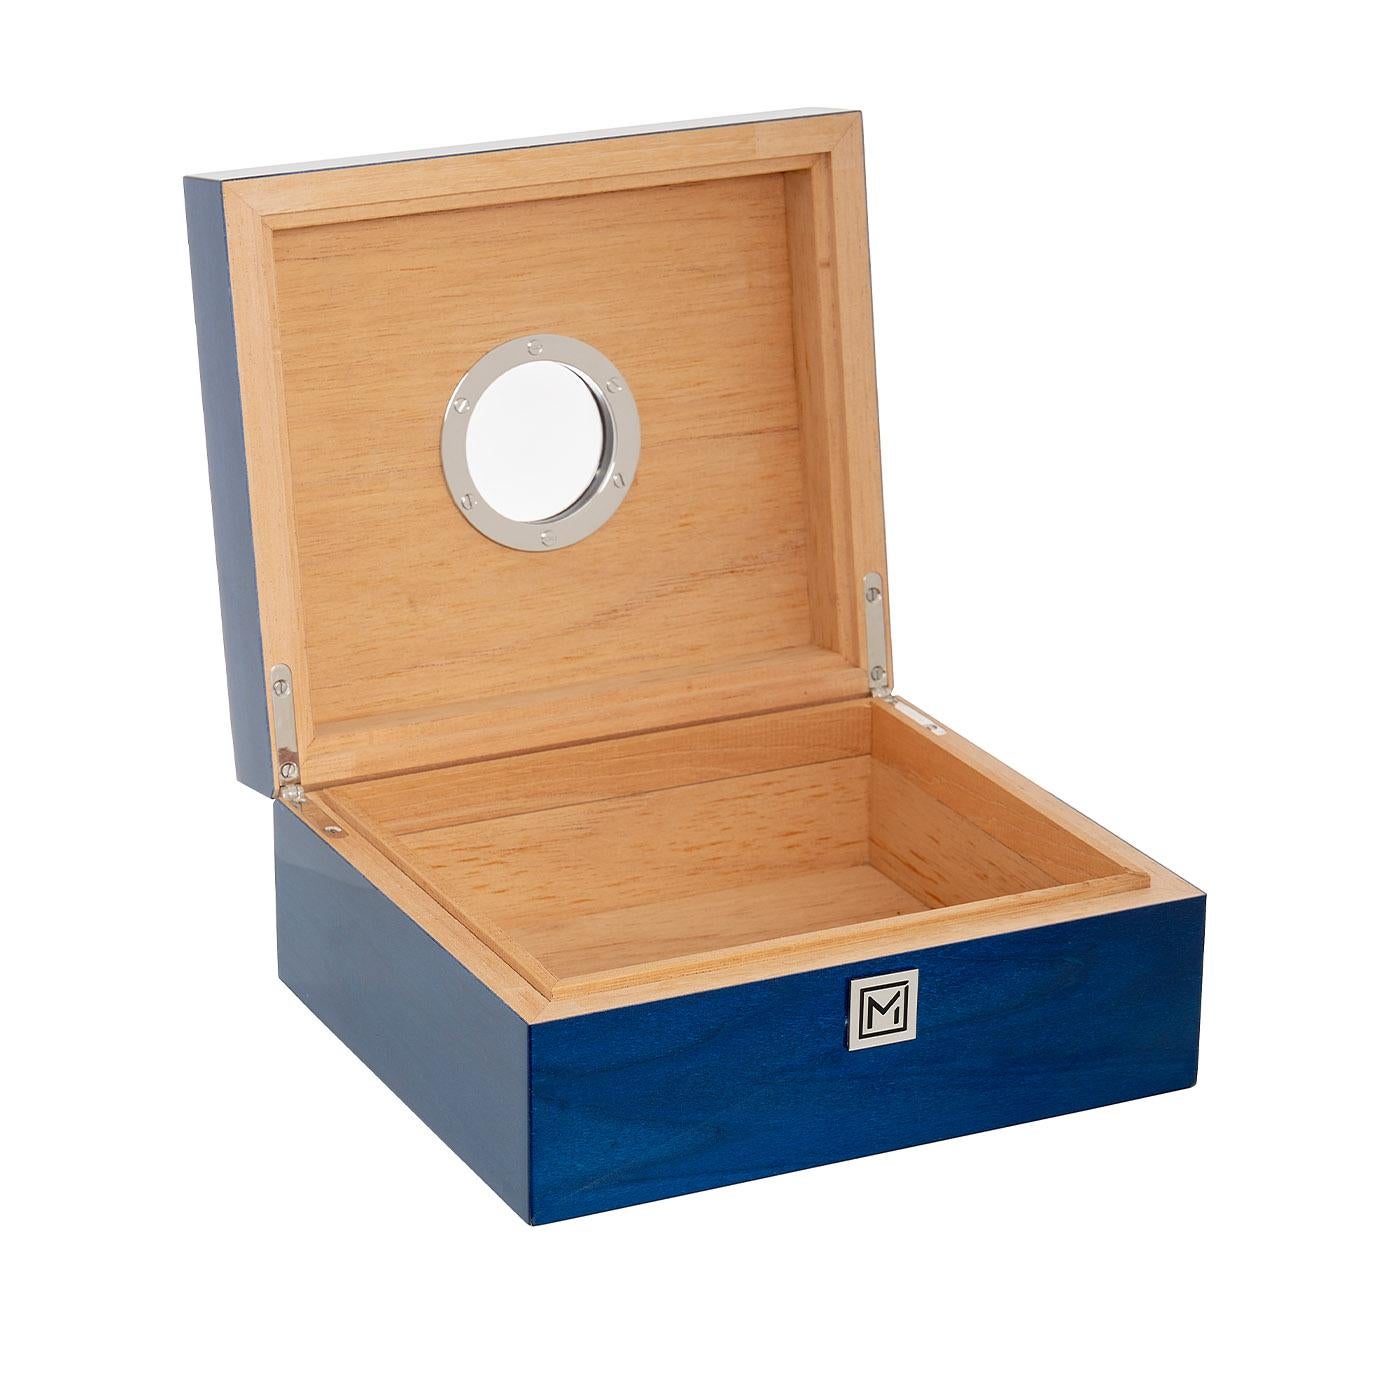 From the Yacht collection, Blue Ocean is the smallest humidor of Maccarrone's collections. Metal accessories are in chromed brass and high gloss mahogany and maple inlay embellish this object. Elegant and refined, our humidor is designed for all